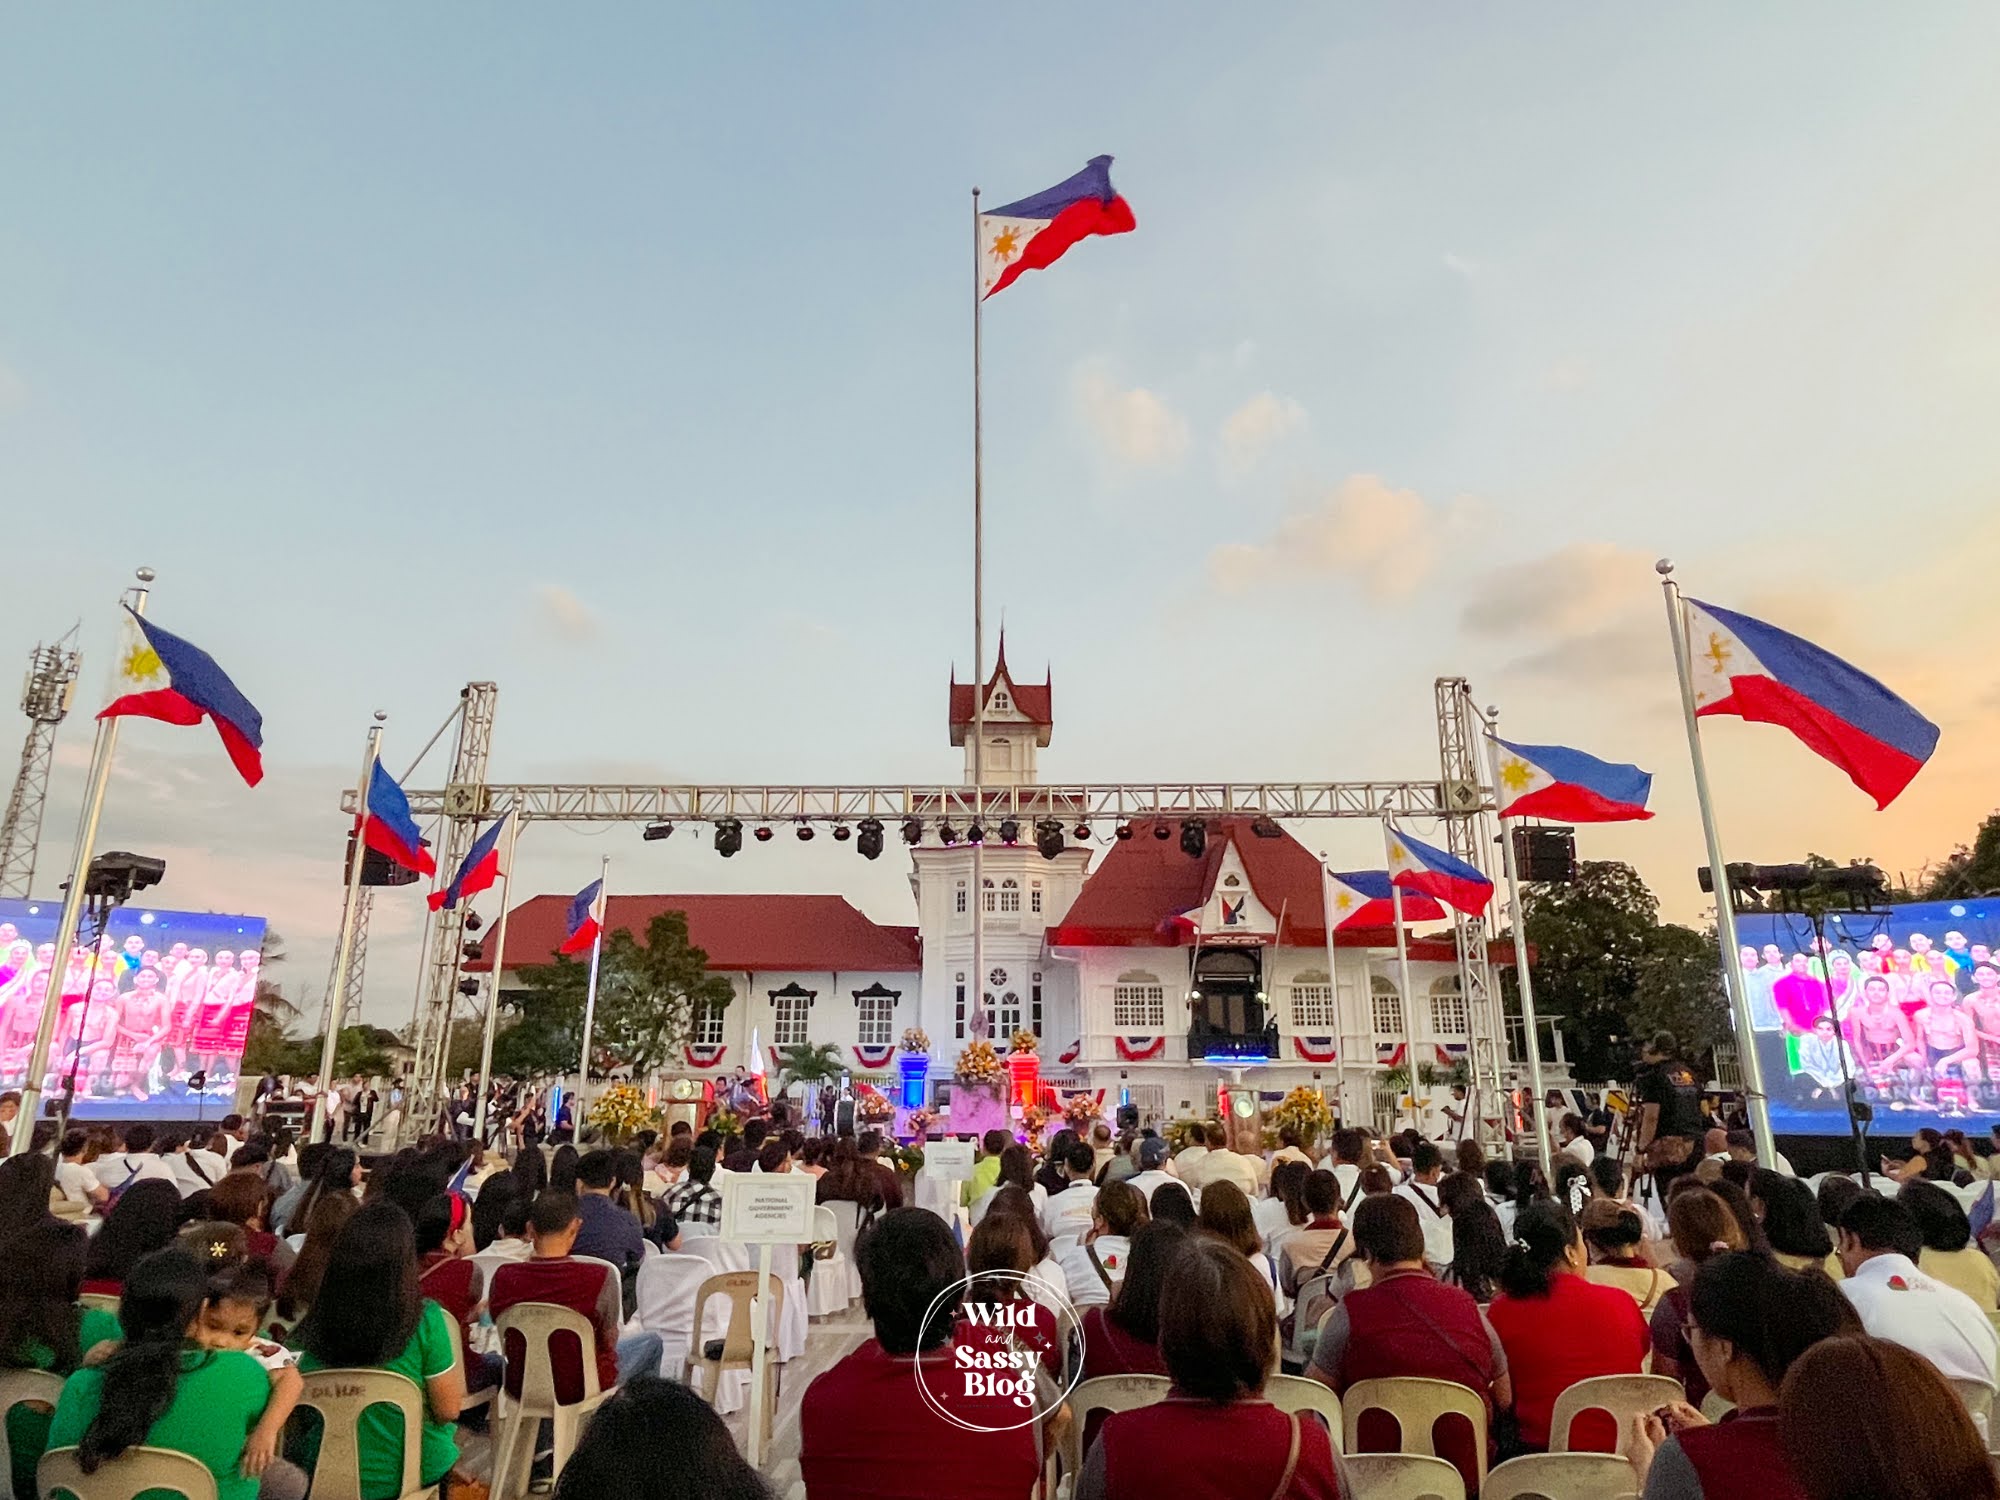 The 100 Day Countdown for 125th Anniversary of Philippine Independence at Emilio Aguinaldo Shrine, Kawit, Cavite National Historical Commission of the Philippines